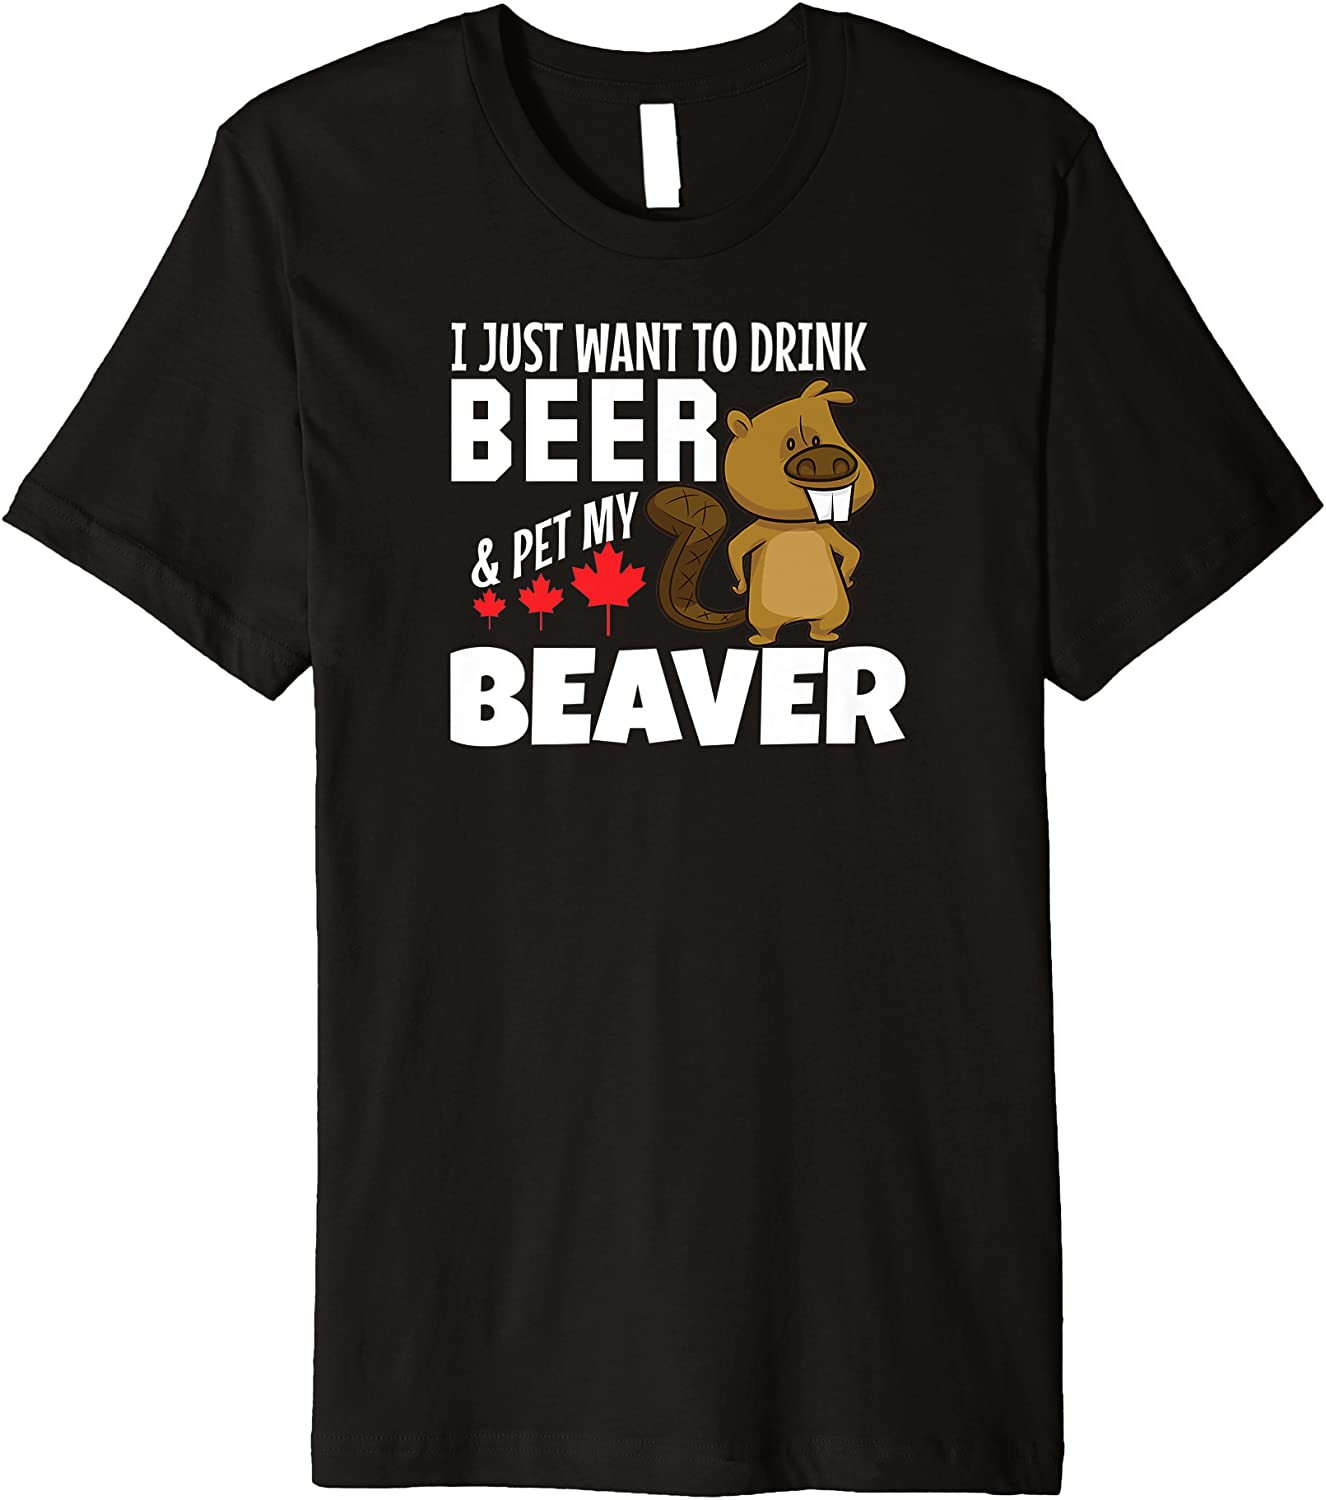 Drink Beer And Pet My Beaver T T-Shirt